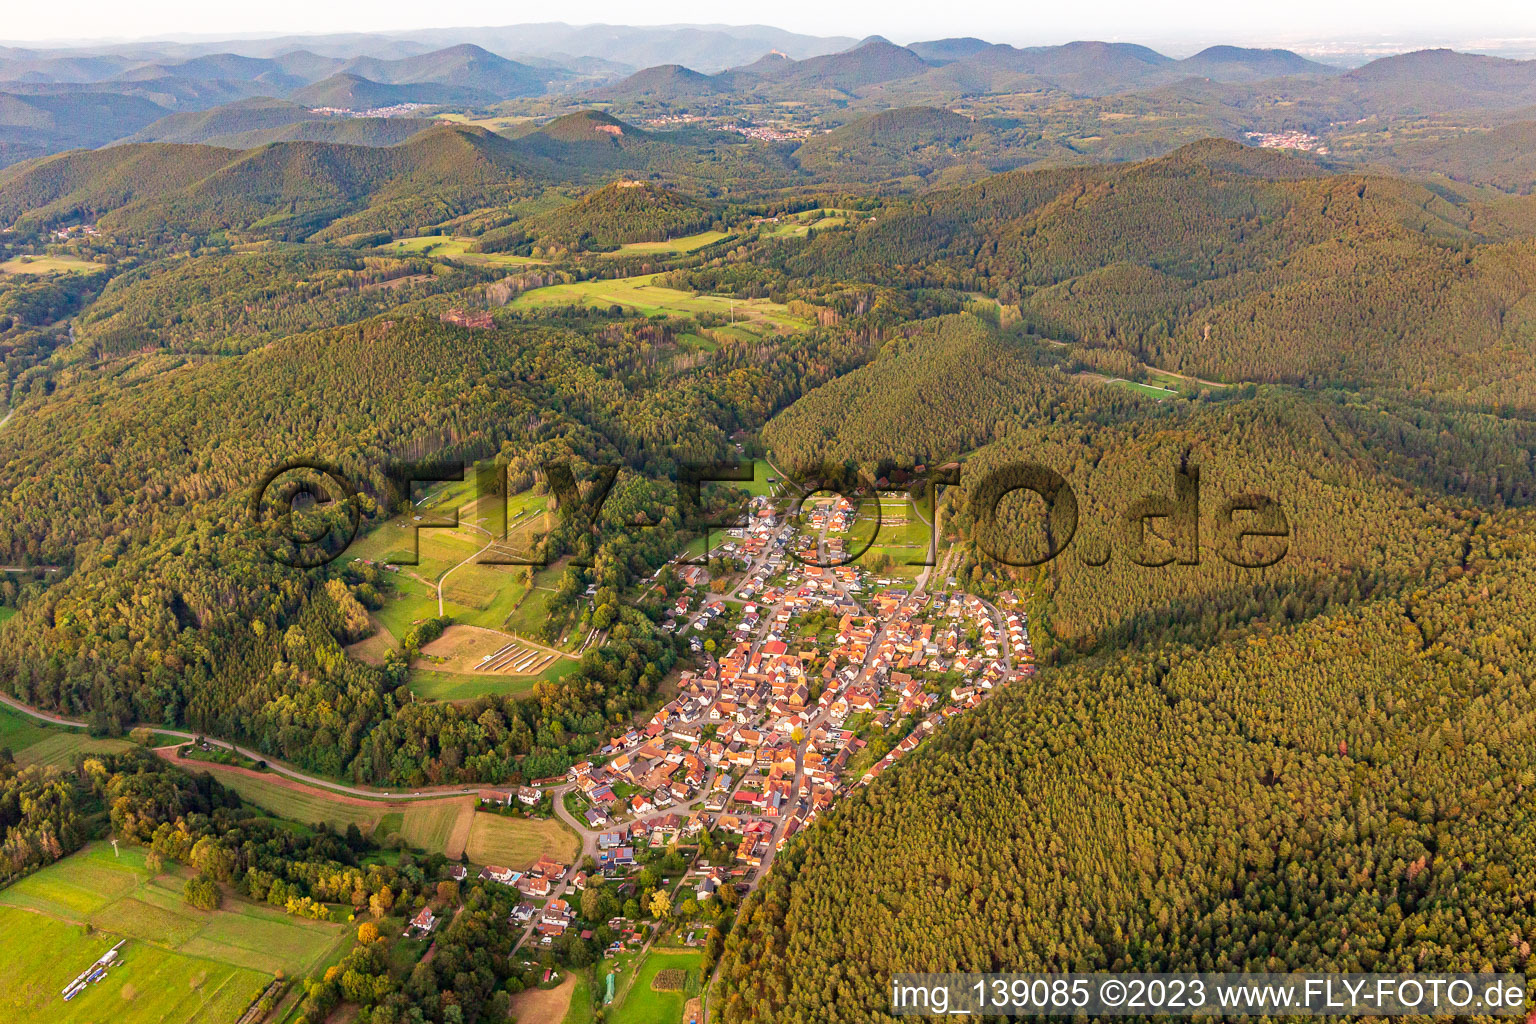 From the southeast in Vorderweidenthal in the state Rhineland-Palatinate, Germany